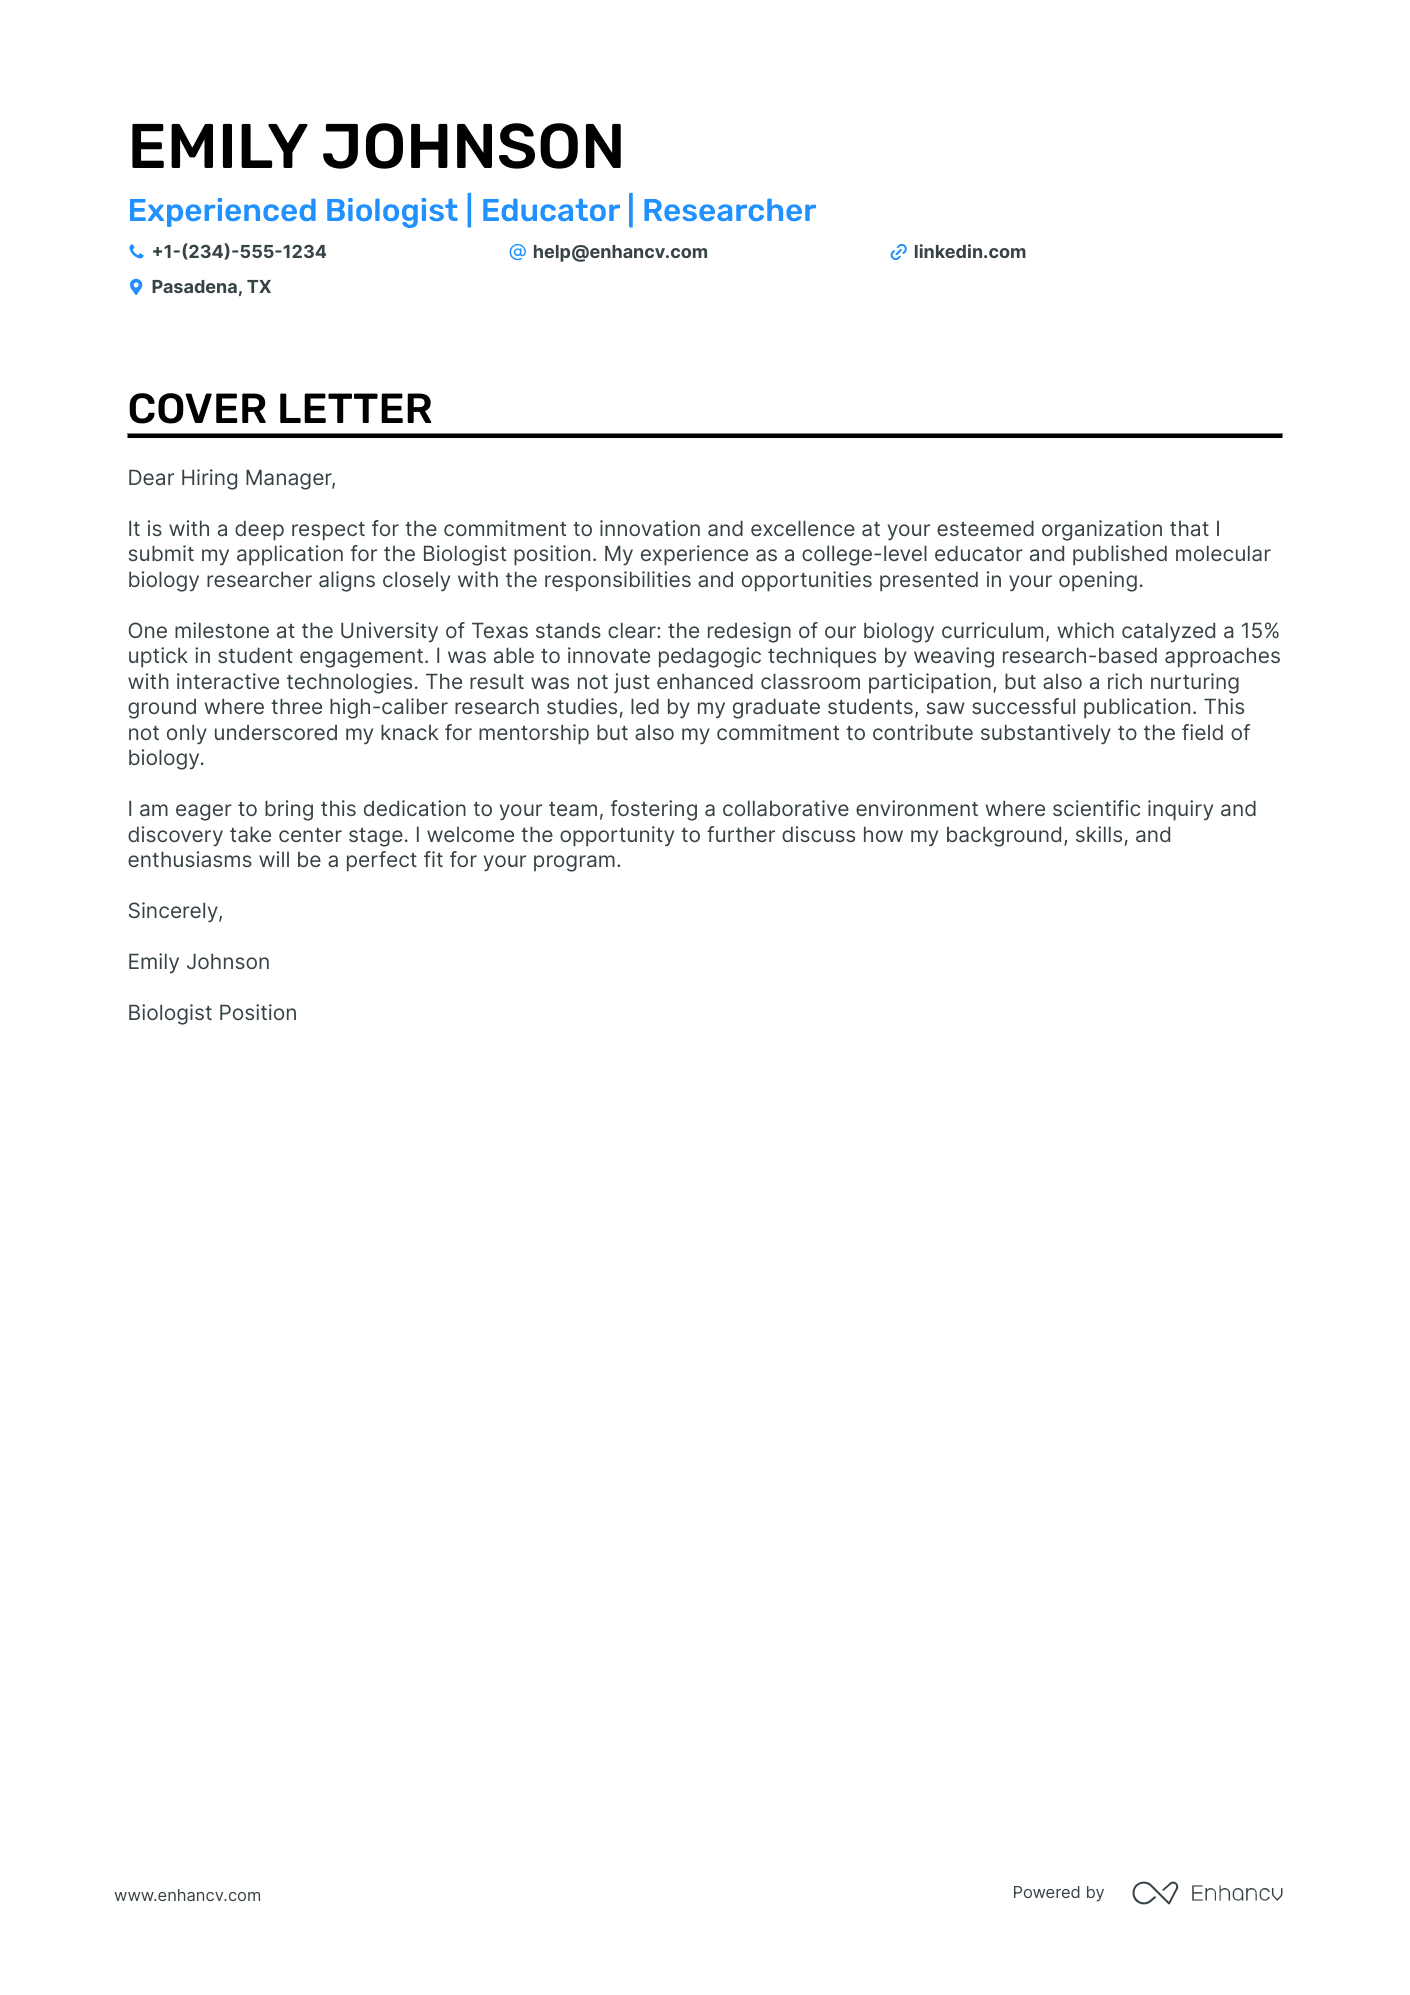 covering letter research scientist job